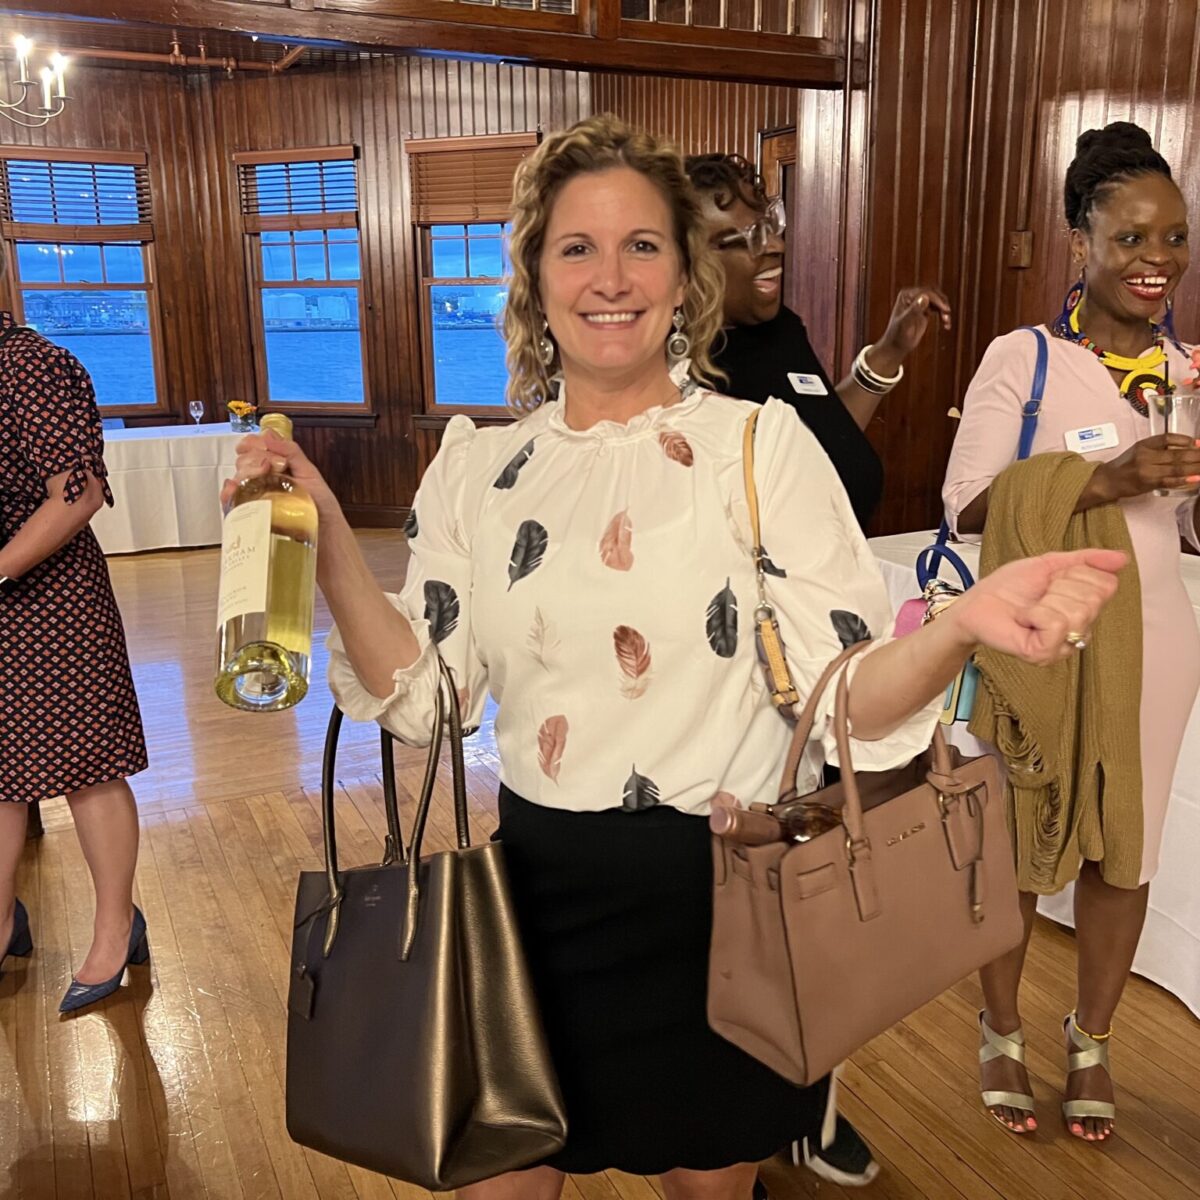 An attendee poses with purses.